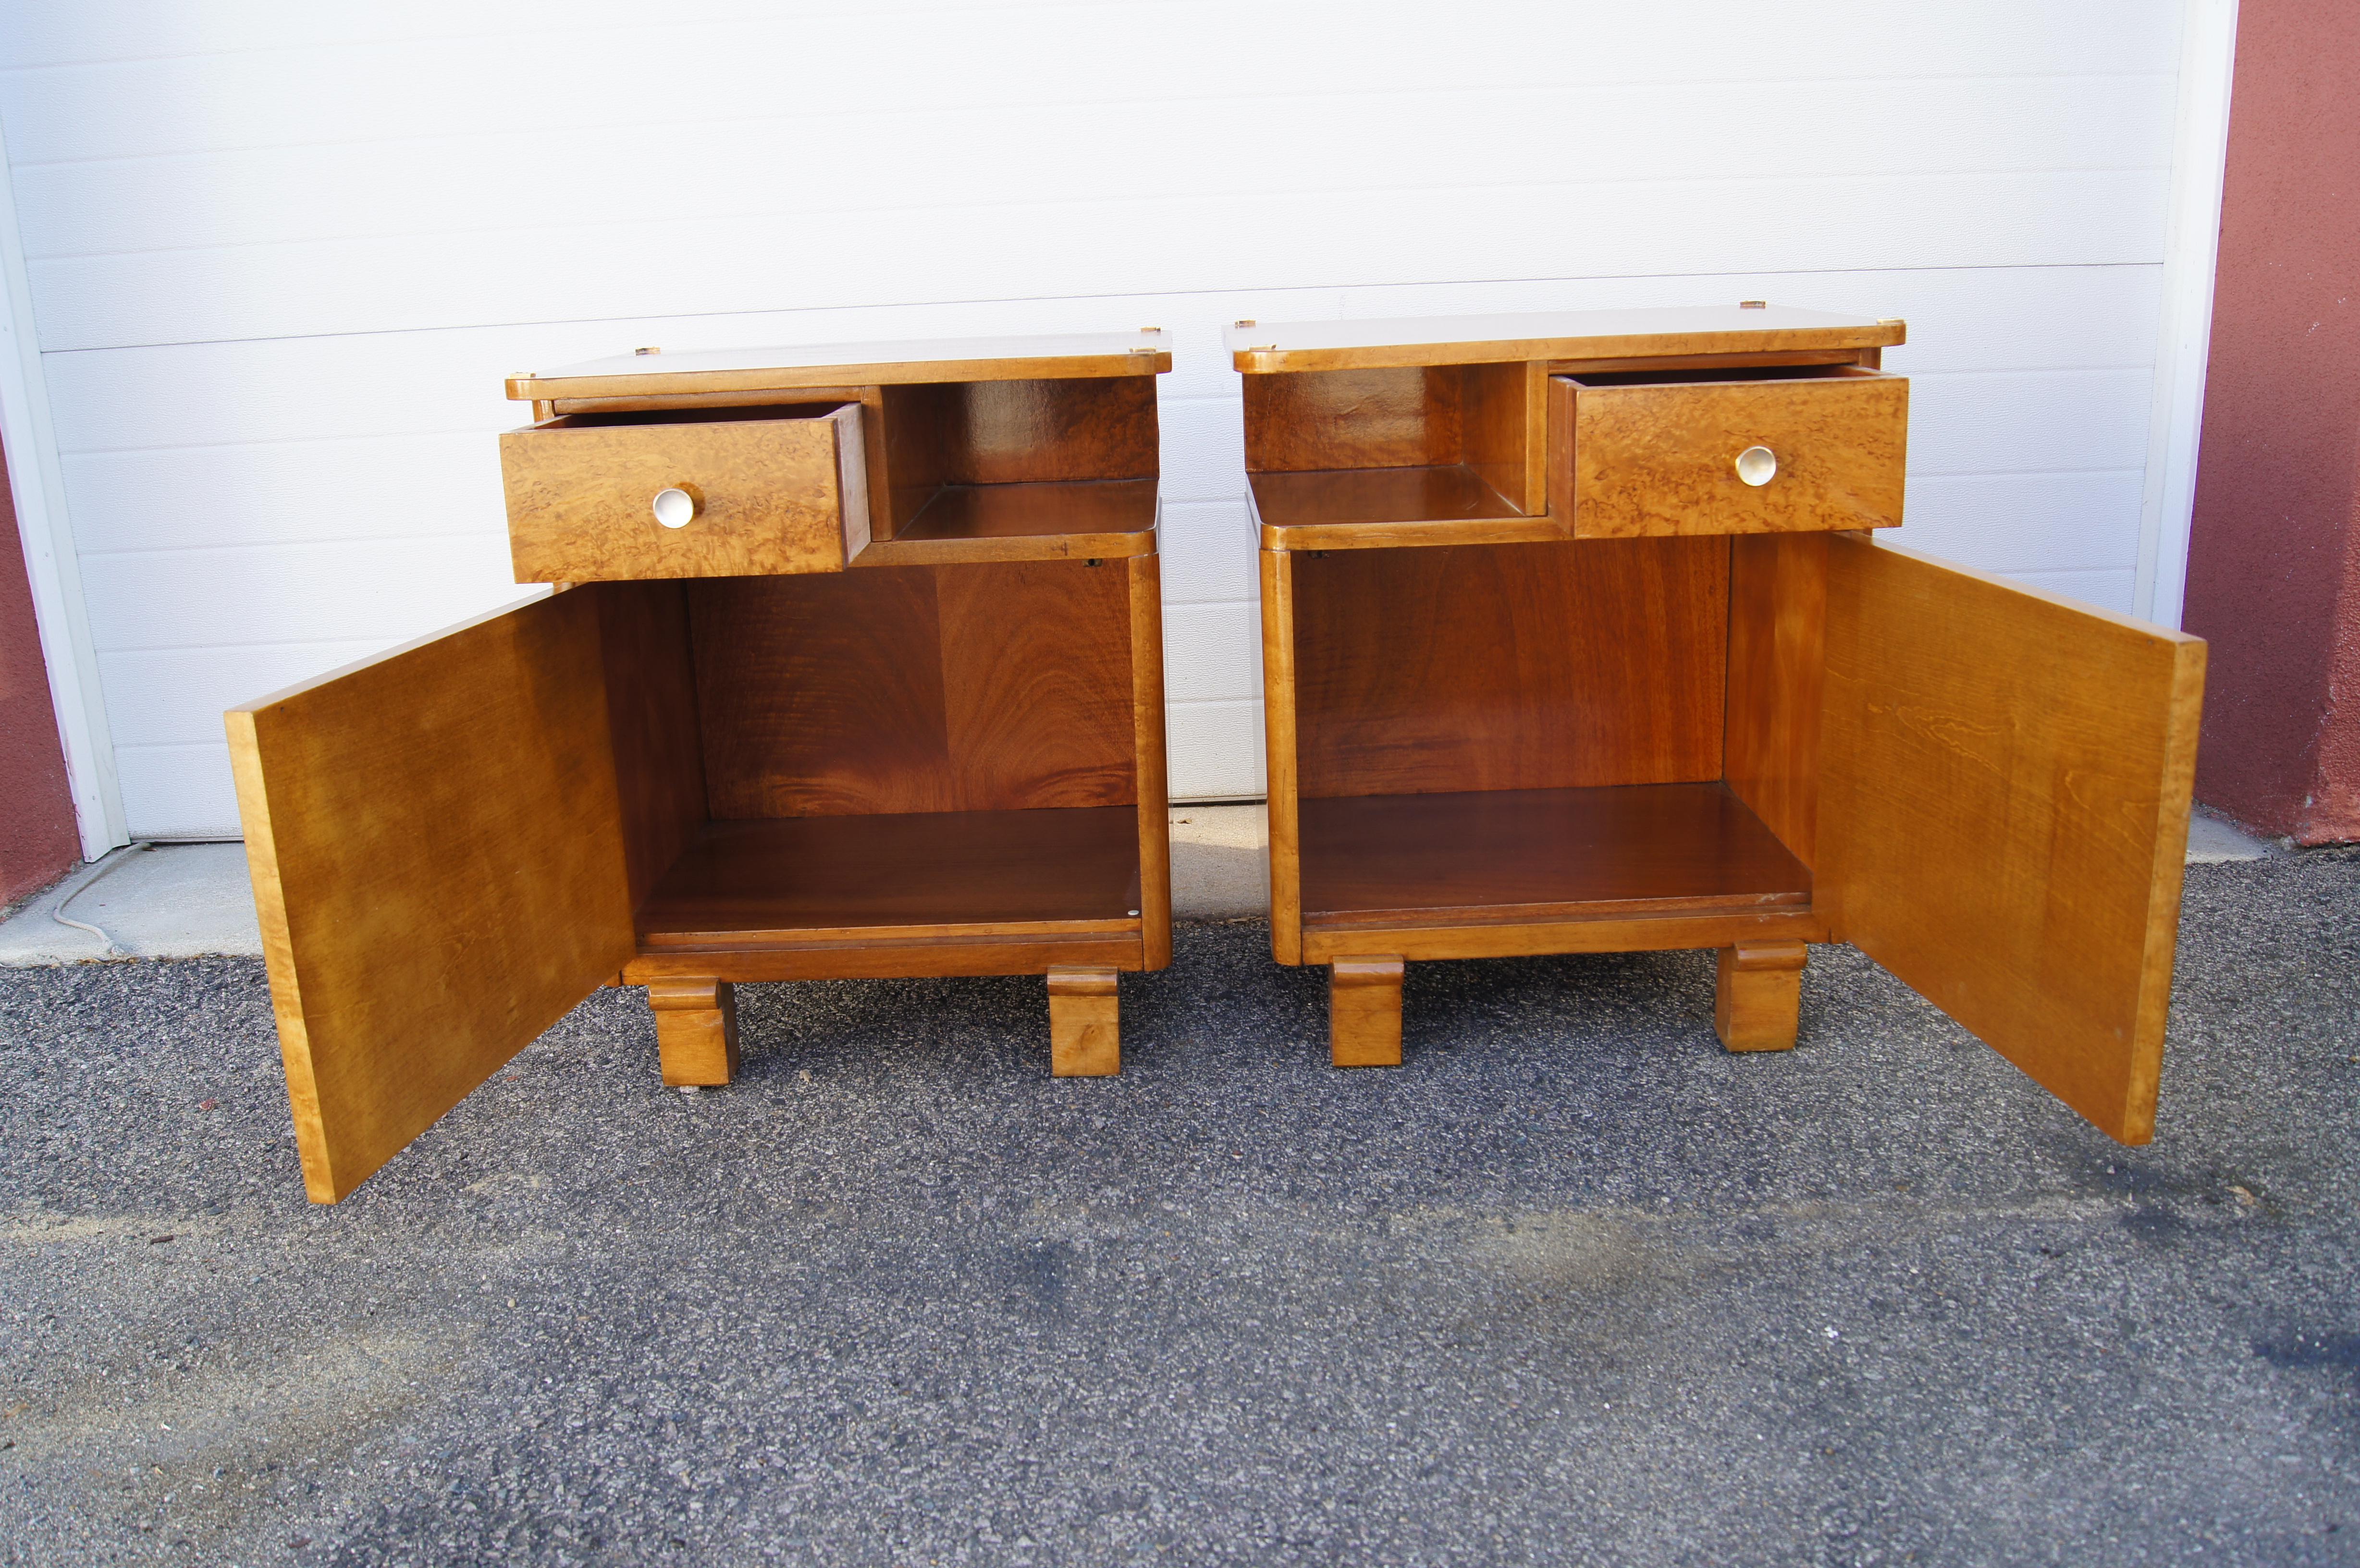 This lovely pair of 1930s Art Deco nightstands features mirror-image glossy burl wood cases on sturdy carved legs. Behind a door is a large storage space; above is a small drawer opposite an open shelf. Brass accents decorate each corner of the top